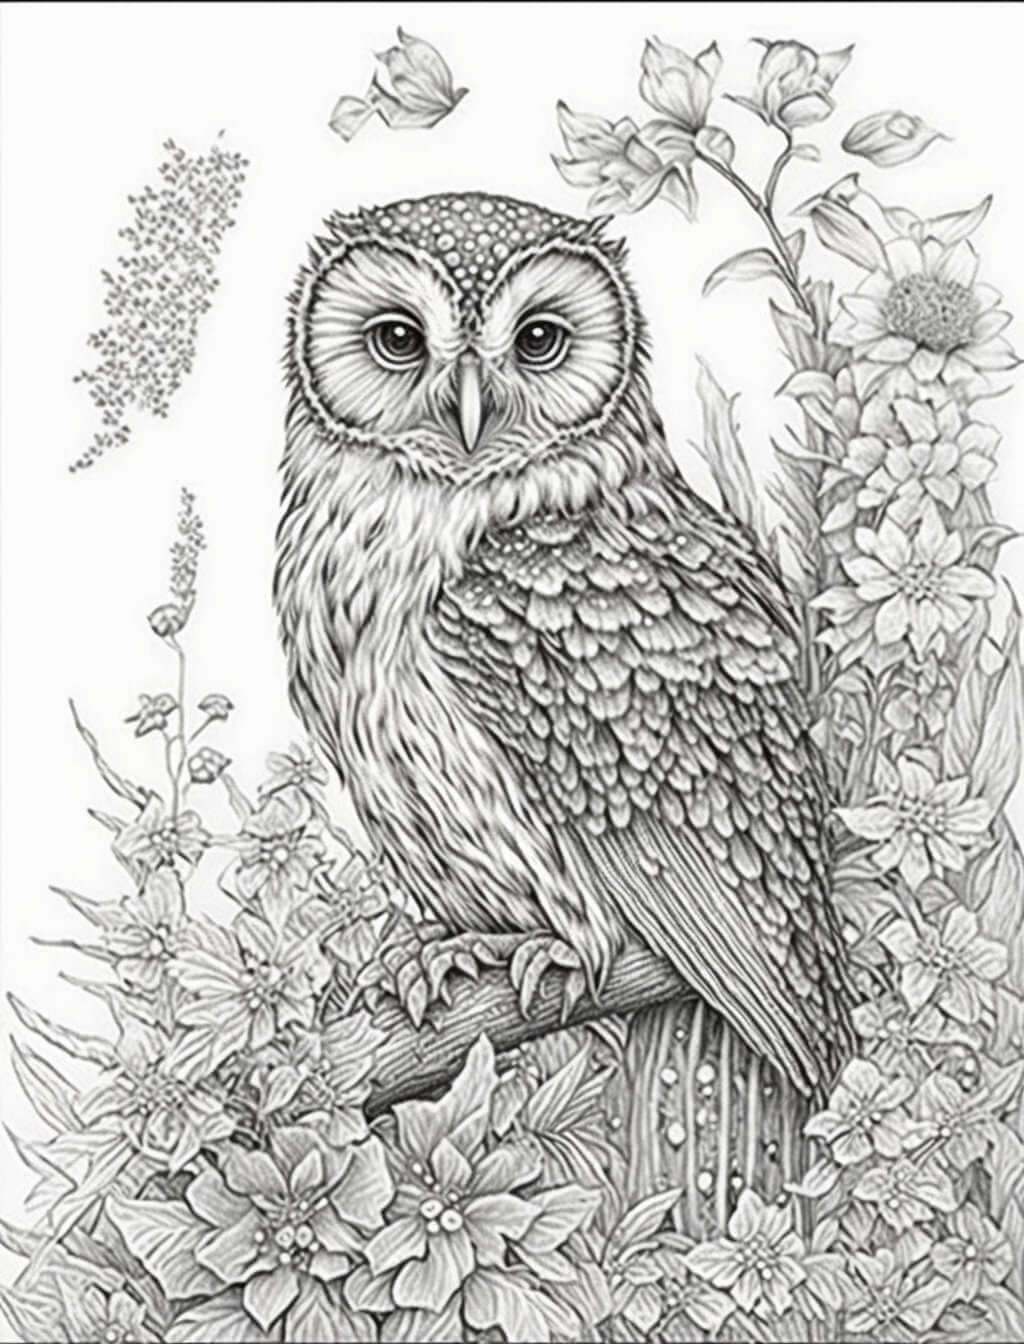 12 Adult coloring book pages,12 images /Digital download